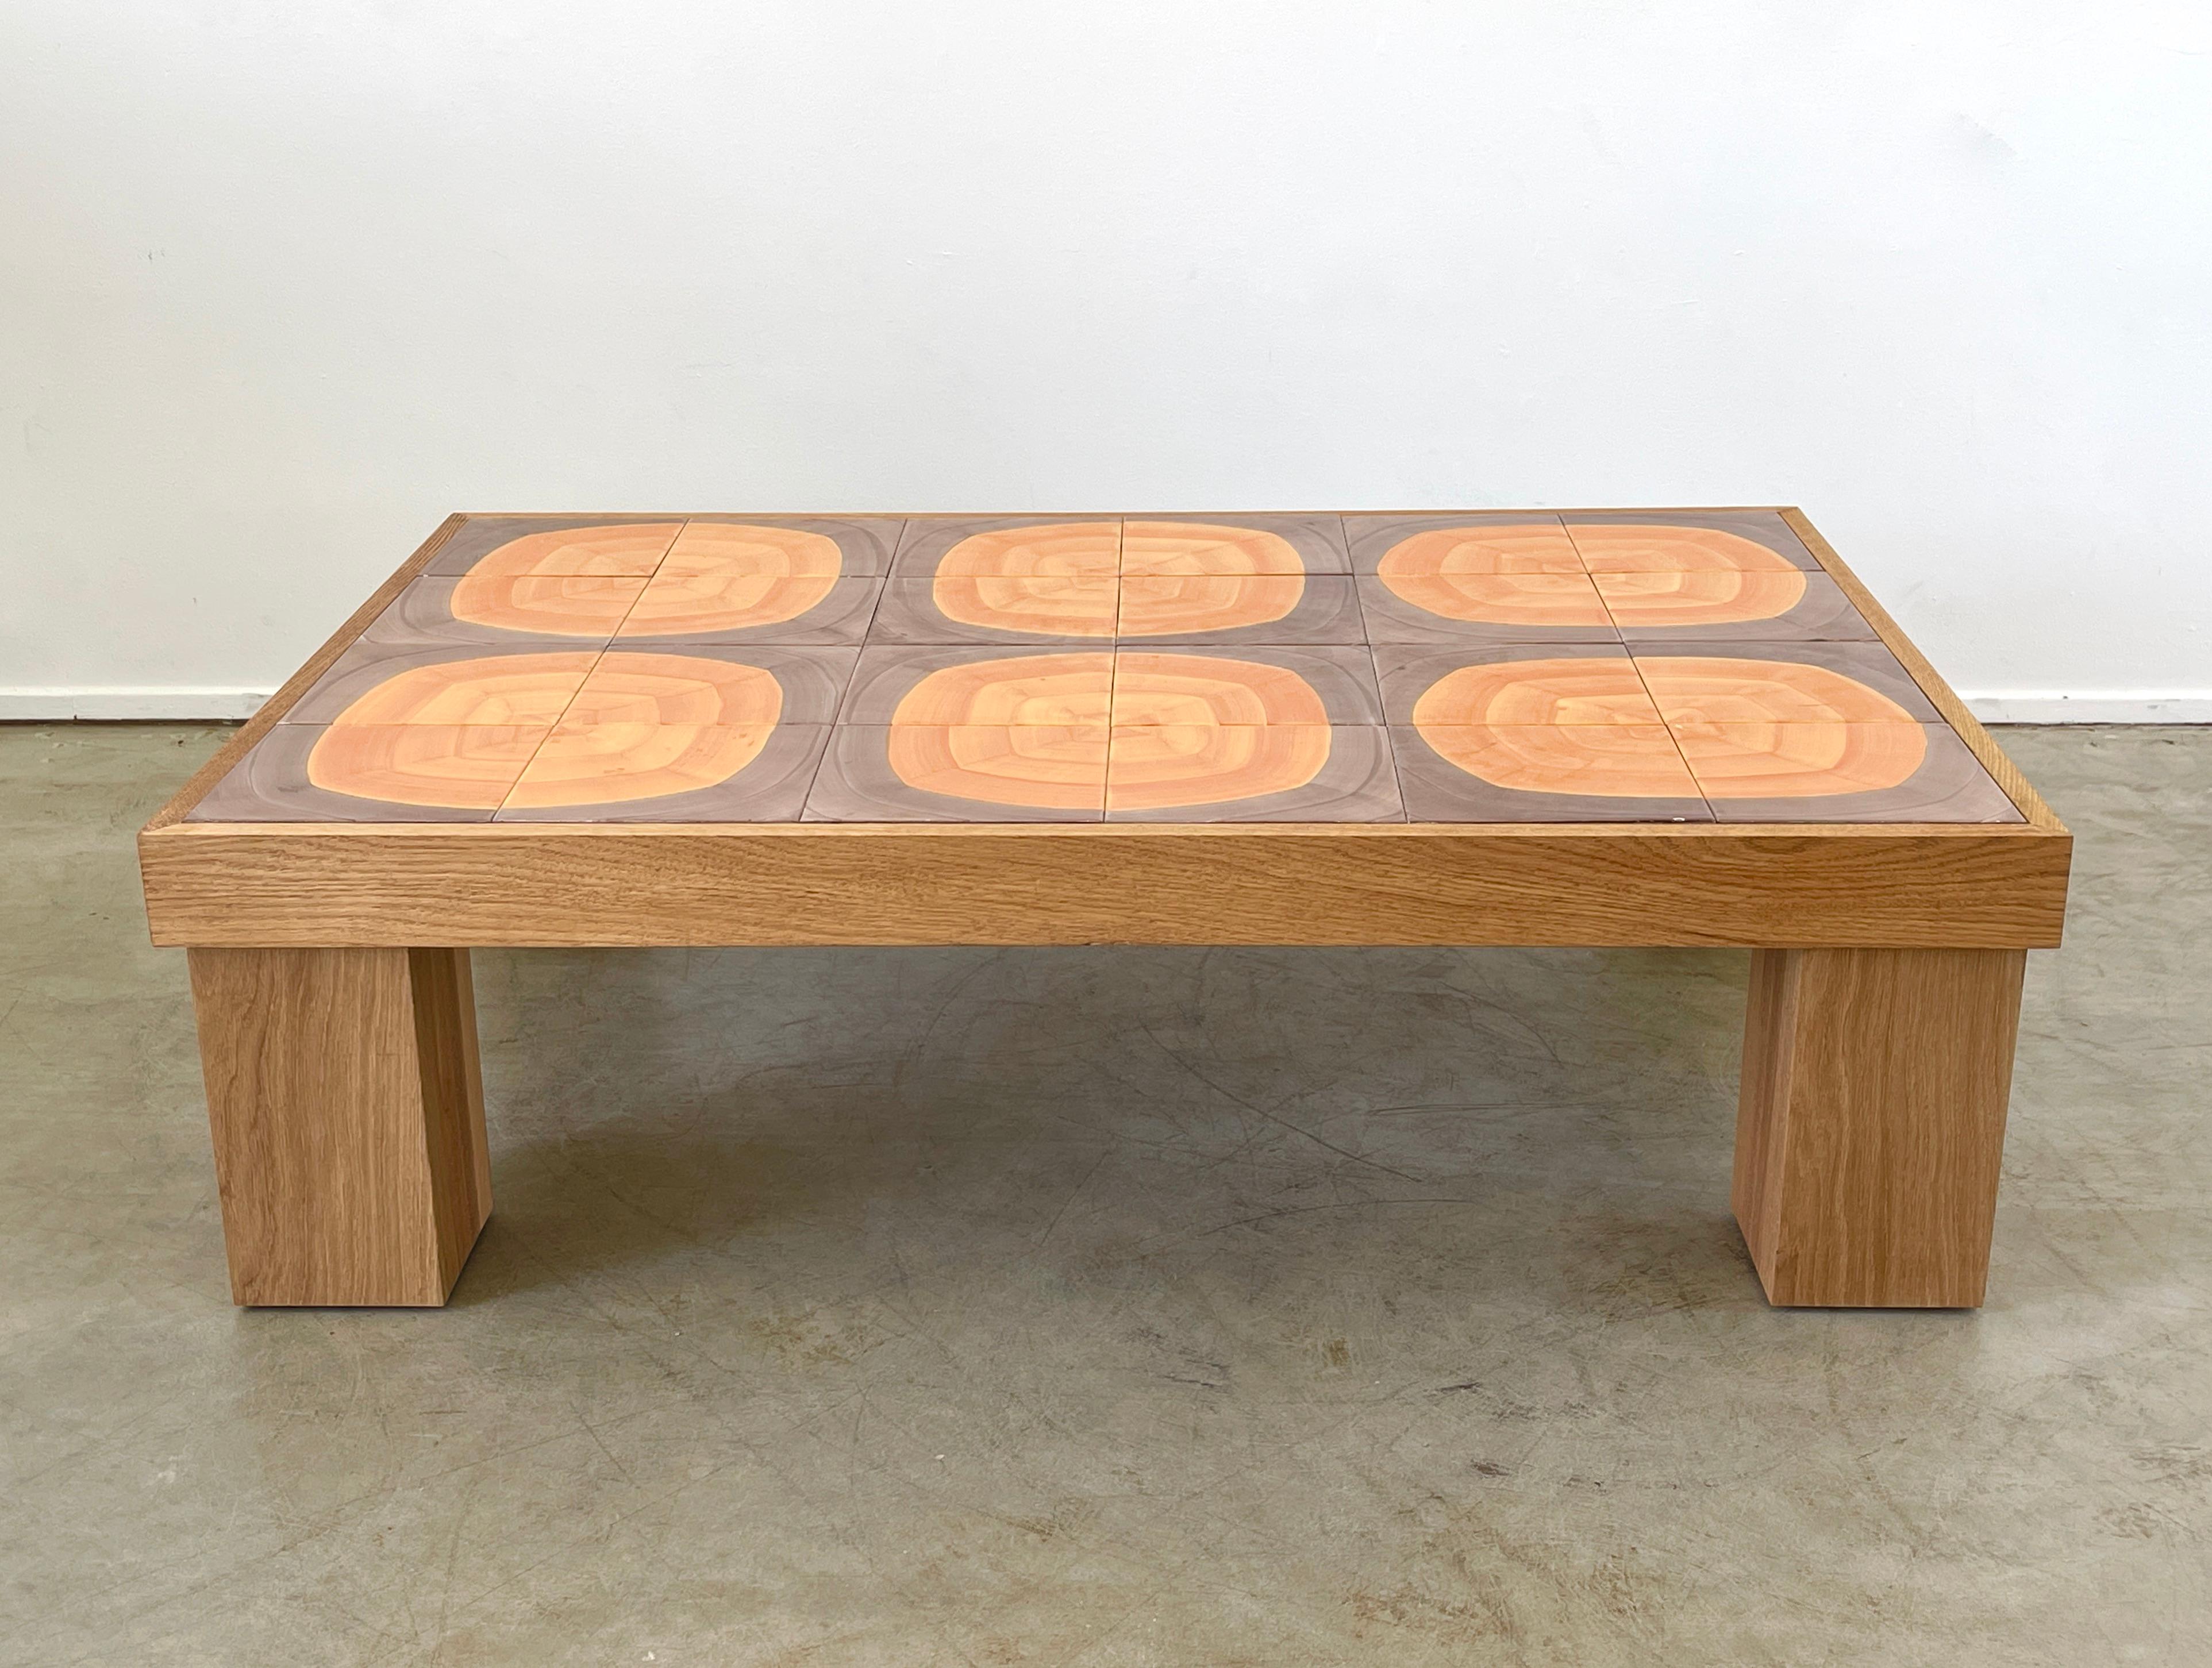 Incredibly rare 1950's French ceramic coffee table attributed to Roger Capron
Beautiful color palette of ceramic tiles - individually placed into surface of table 
New white oak base in exact dimension of original.